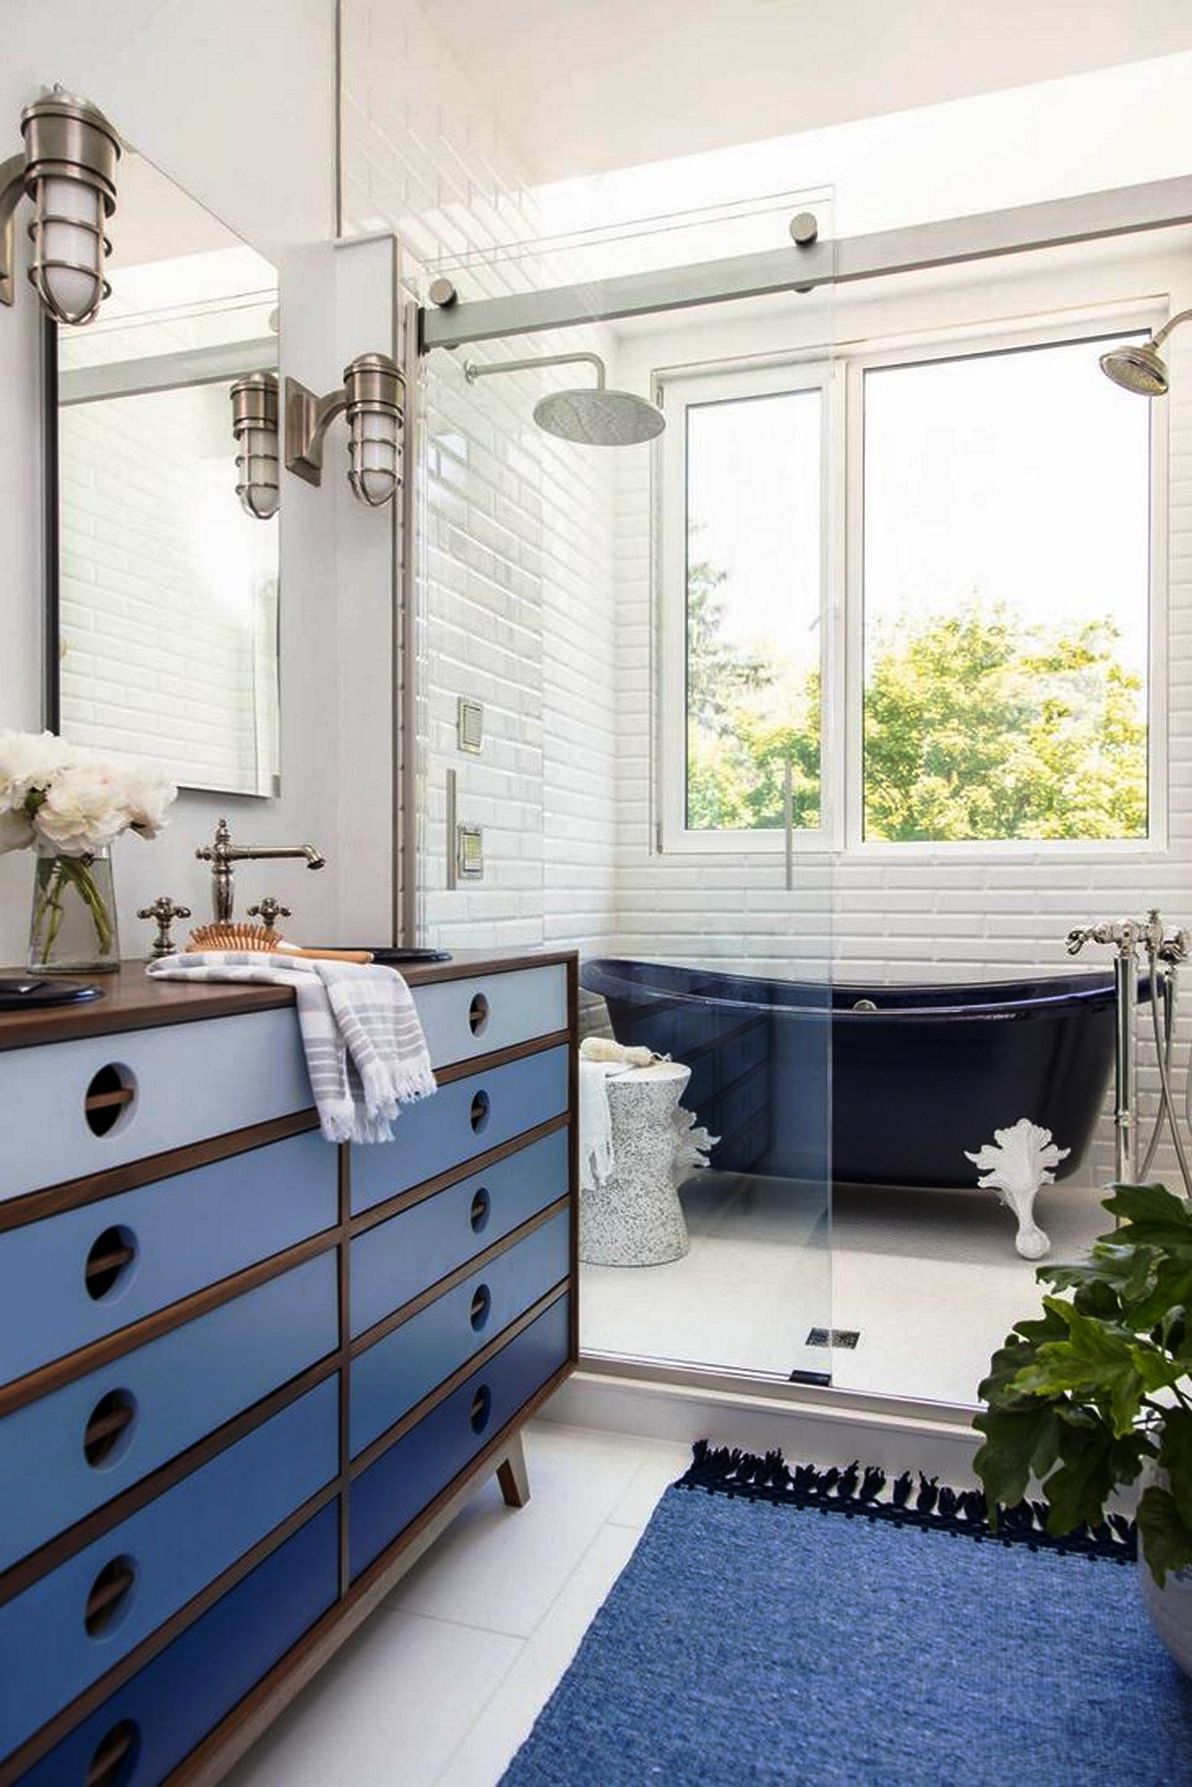 Bathroom trends 2021 the perfect new look for your bathroom remodeling 11